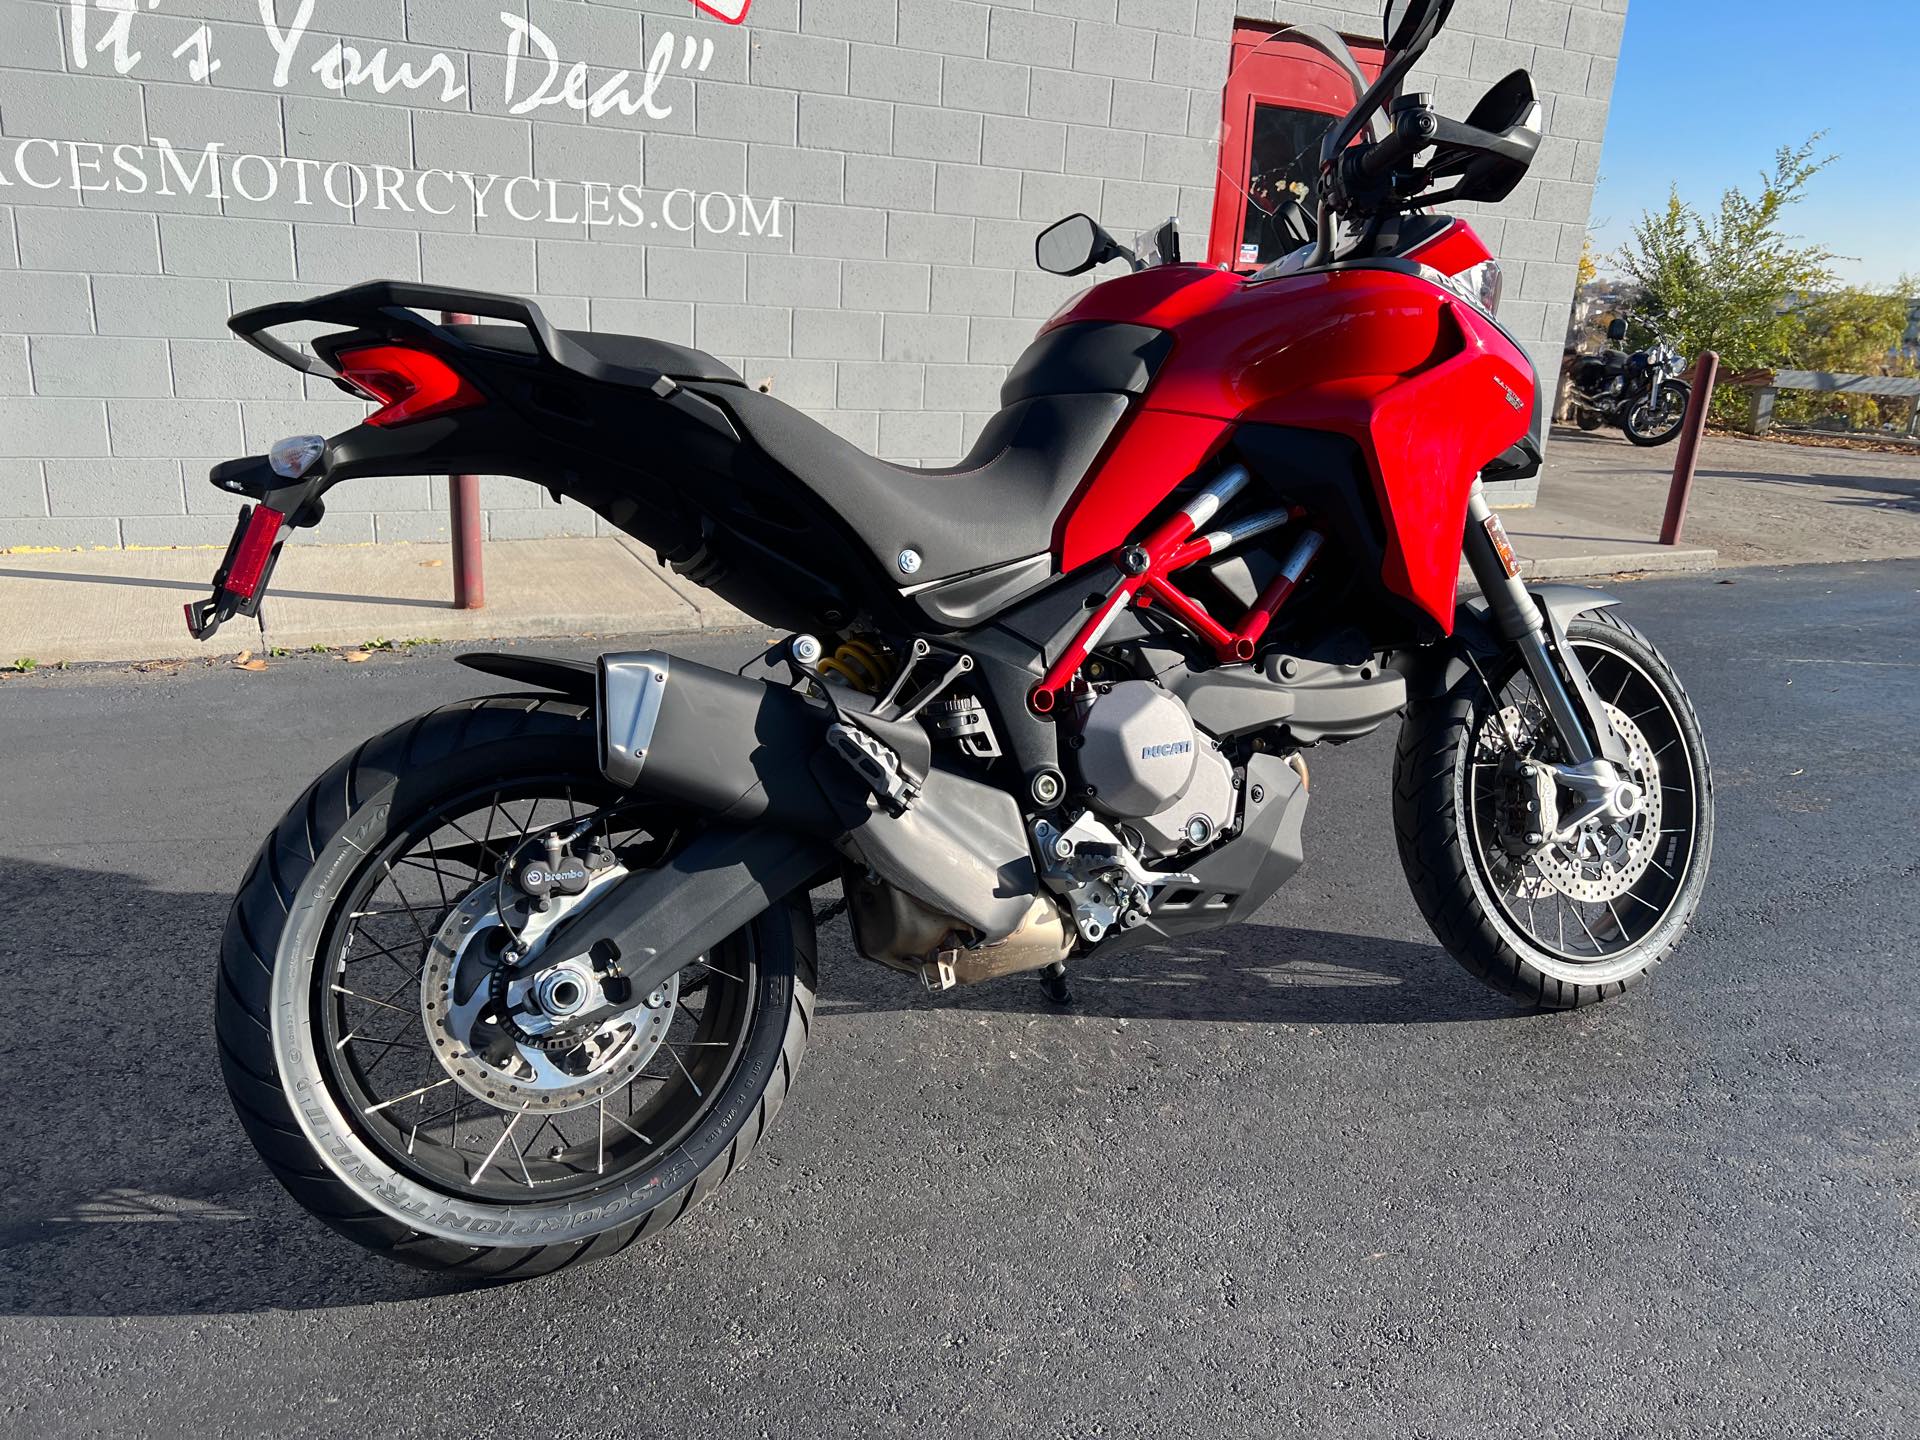 2021 Ducati Multistrada 950 S Spoked Wheels at Aces Motorcycles - Fort Collins